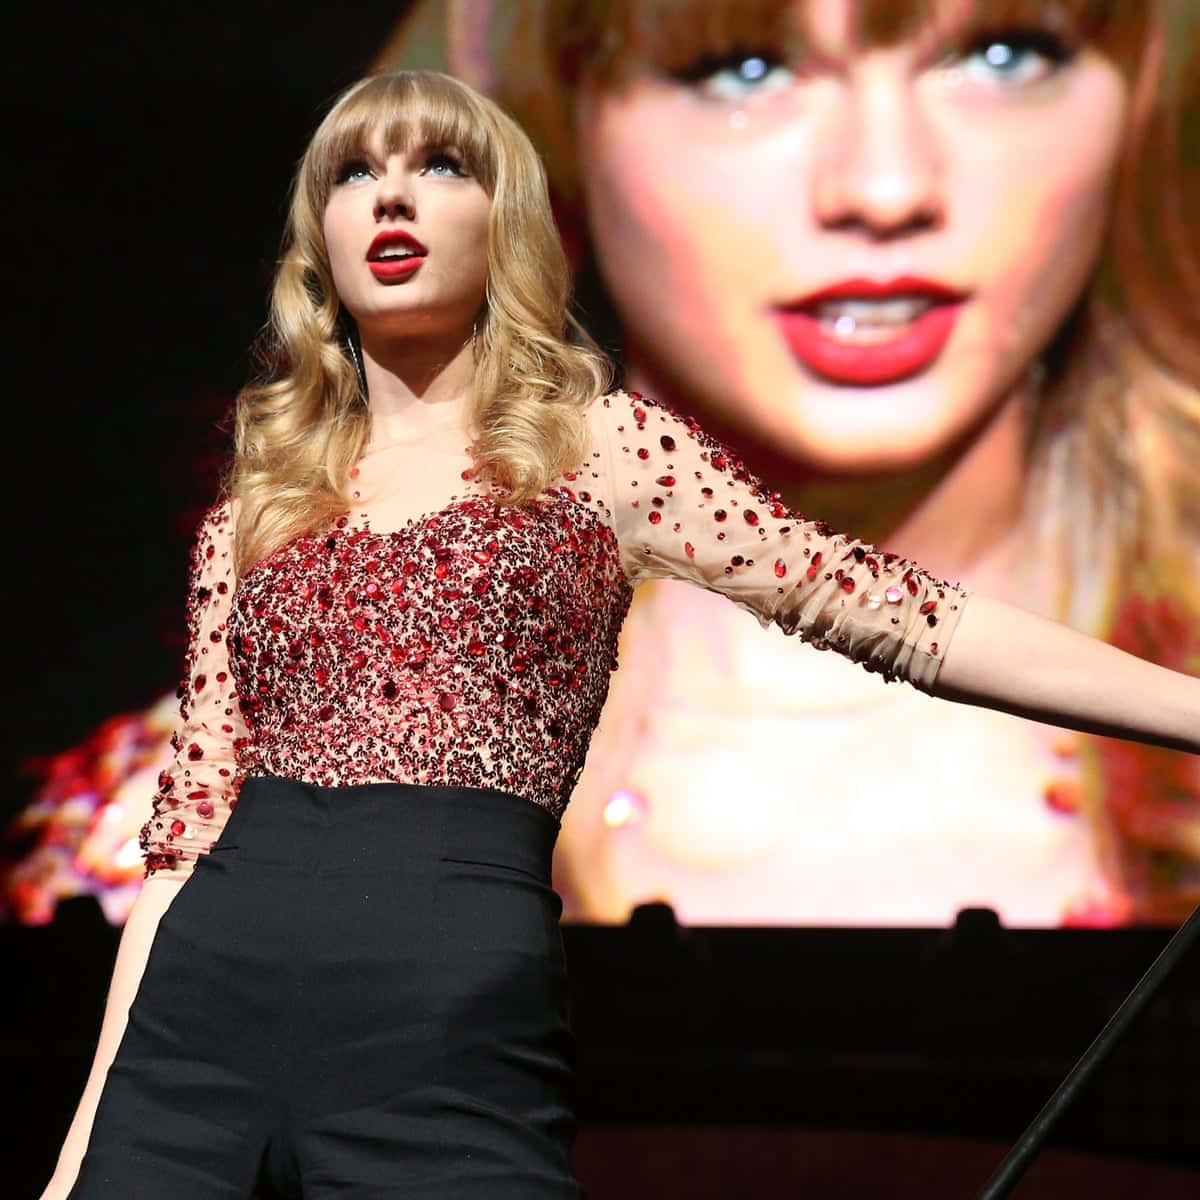 "Red Taylor's Version of Happiness" Wallpaper